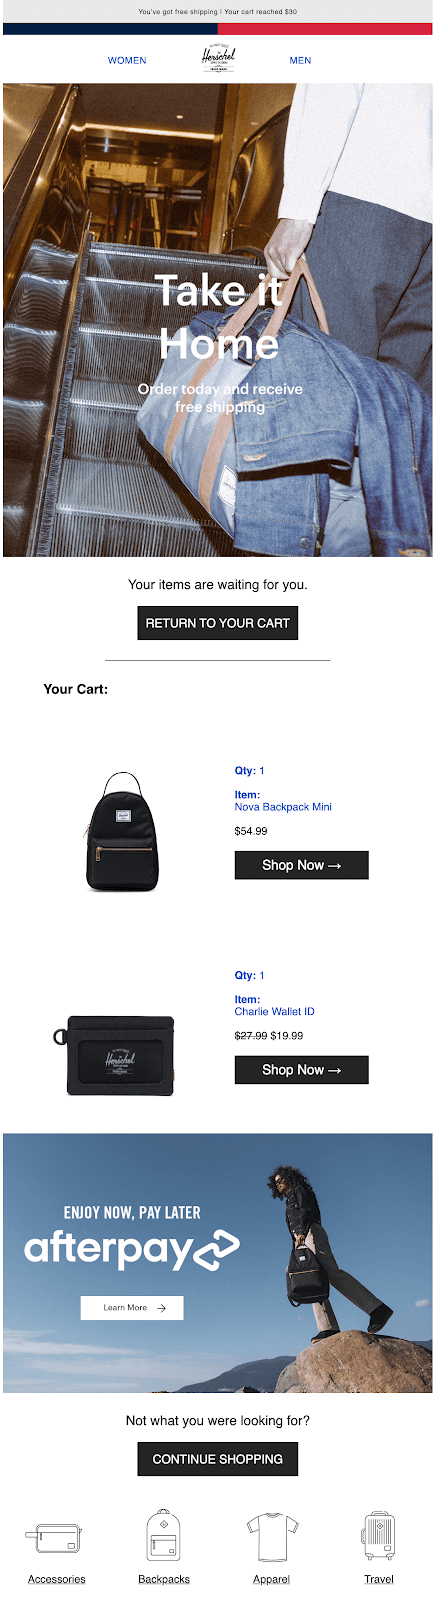 15 Abandoned Cart Email Examples [Best Practices + Tips]